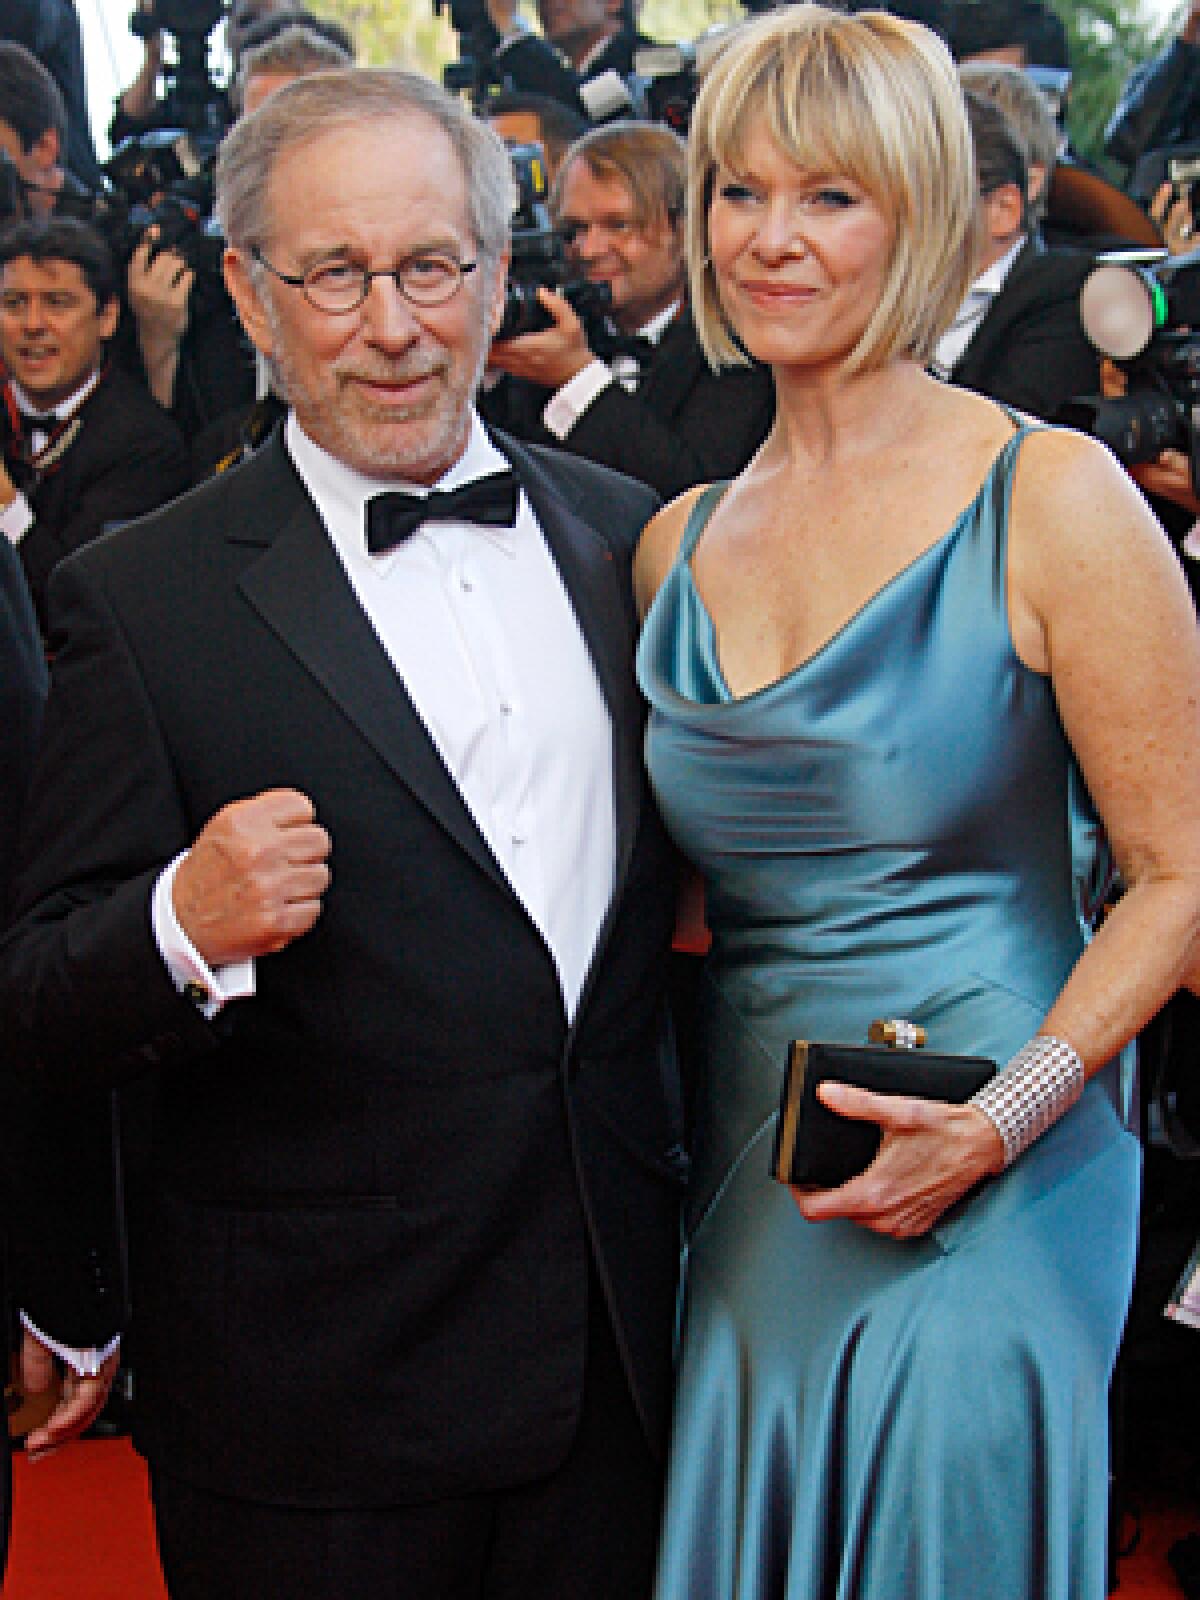 Steven Spielberg and wife Kate Capshaw donated $100,000 to the effort.